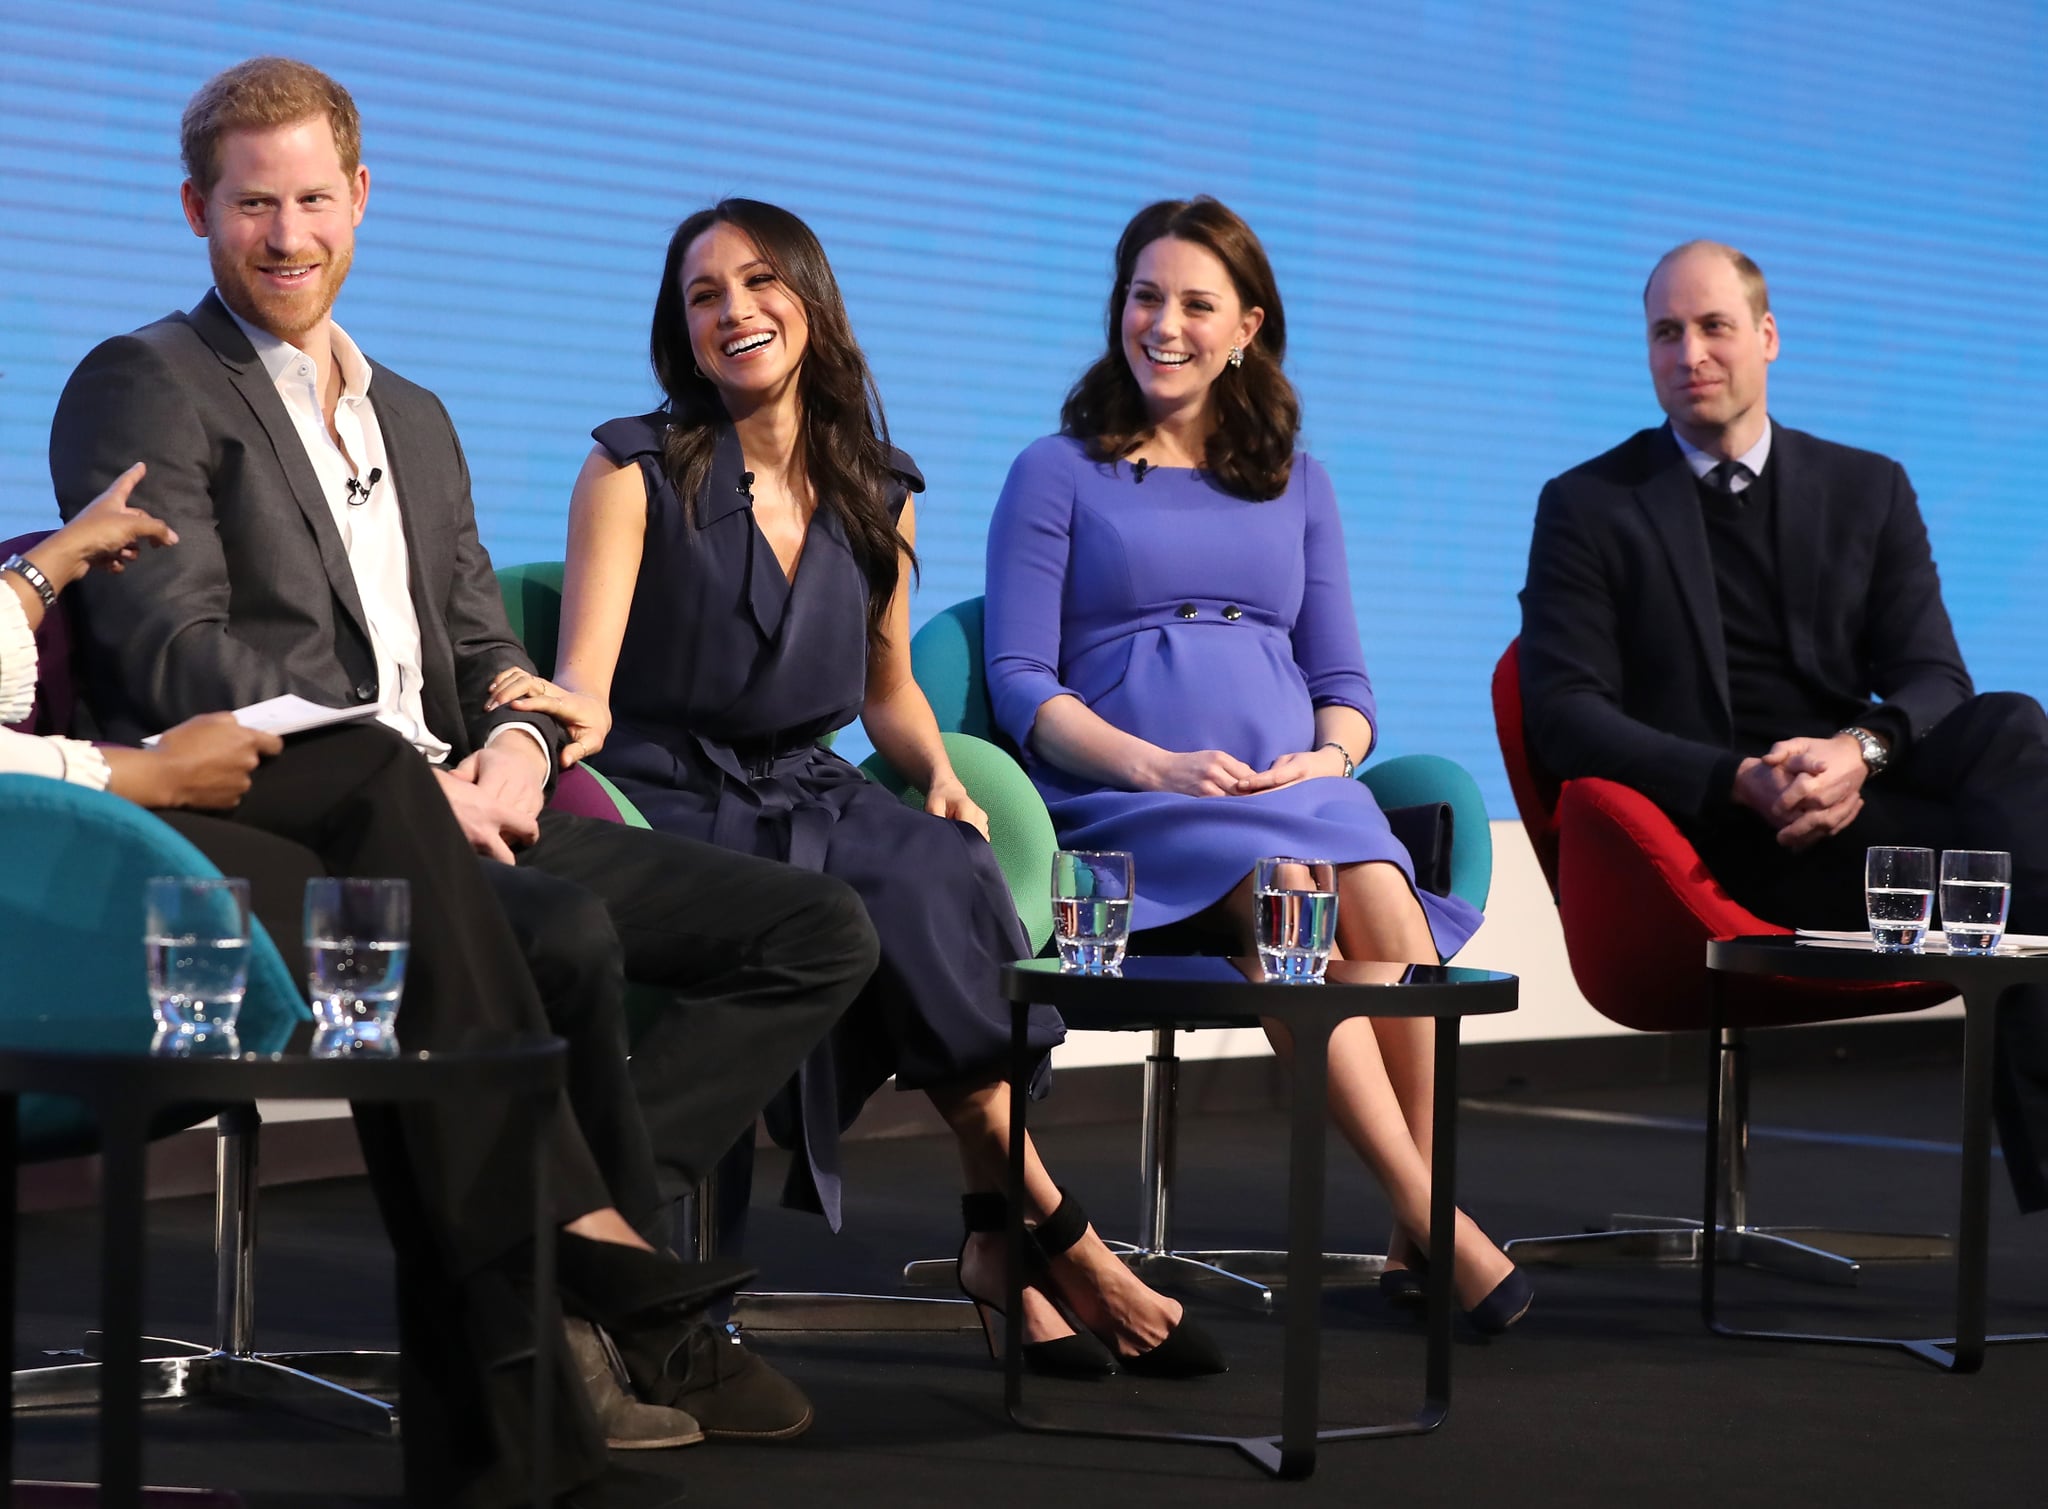 LONDON, ENGLAND - FEBRUARY 28:  Prince Harry, Meghan Markle, Catherine, Duchess of Cambridge and Prince William, Duke of Cambridge attend the first annual Royal Foundation Forum held at Aviva on February 28, 2018 in London, England. Under the theme 'Making a Difference Together', the event will showcase the programmes run or initiated by The Royal Foundation.  (Photo by Chris Jackson - WPA Pool/Getty Images)